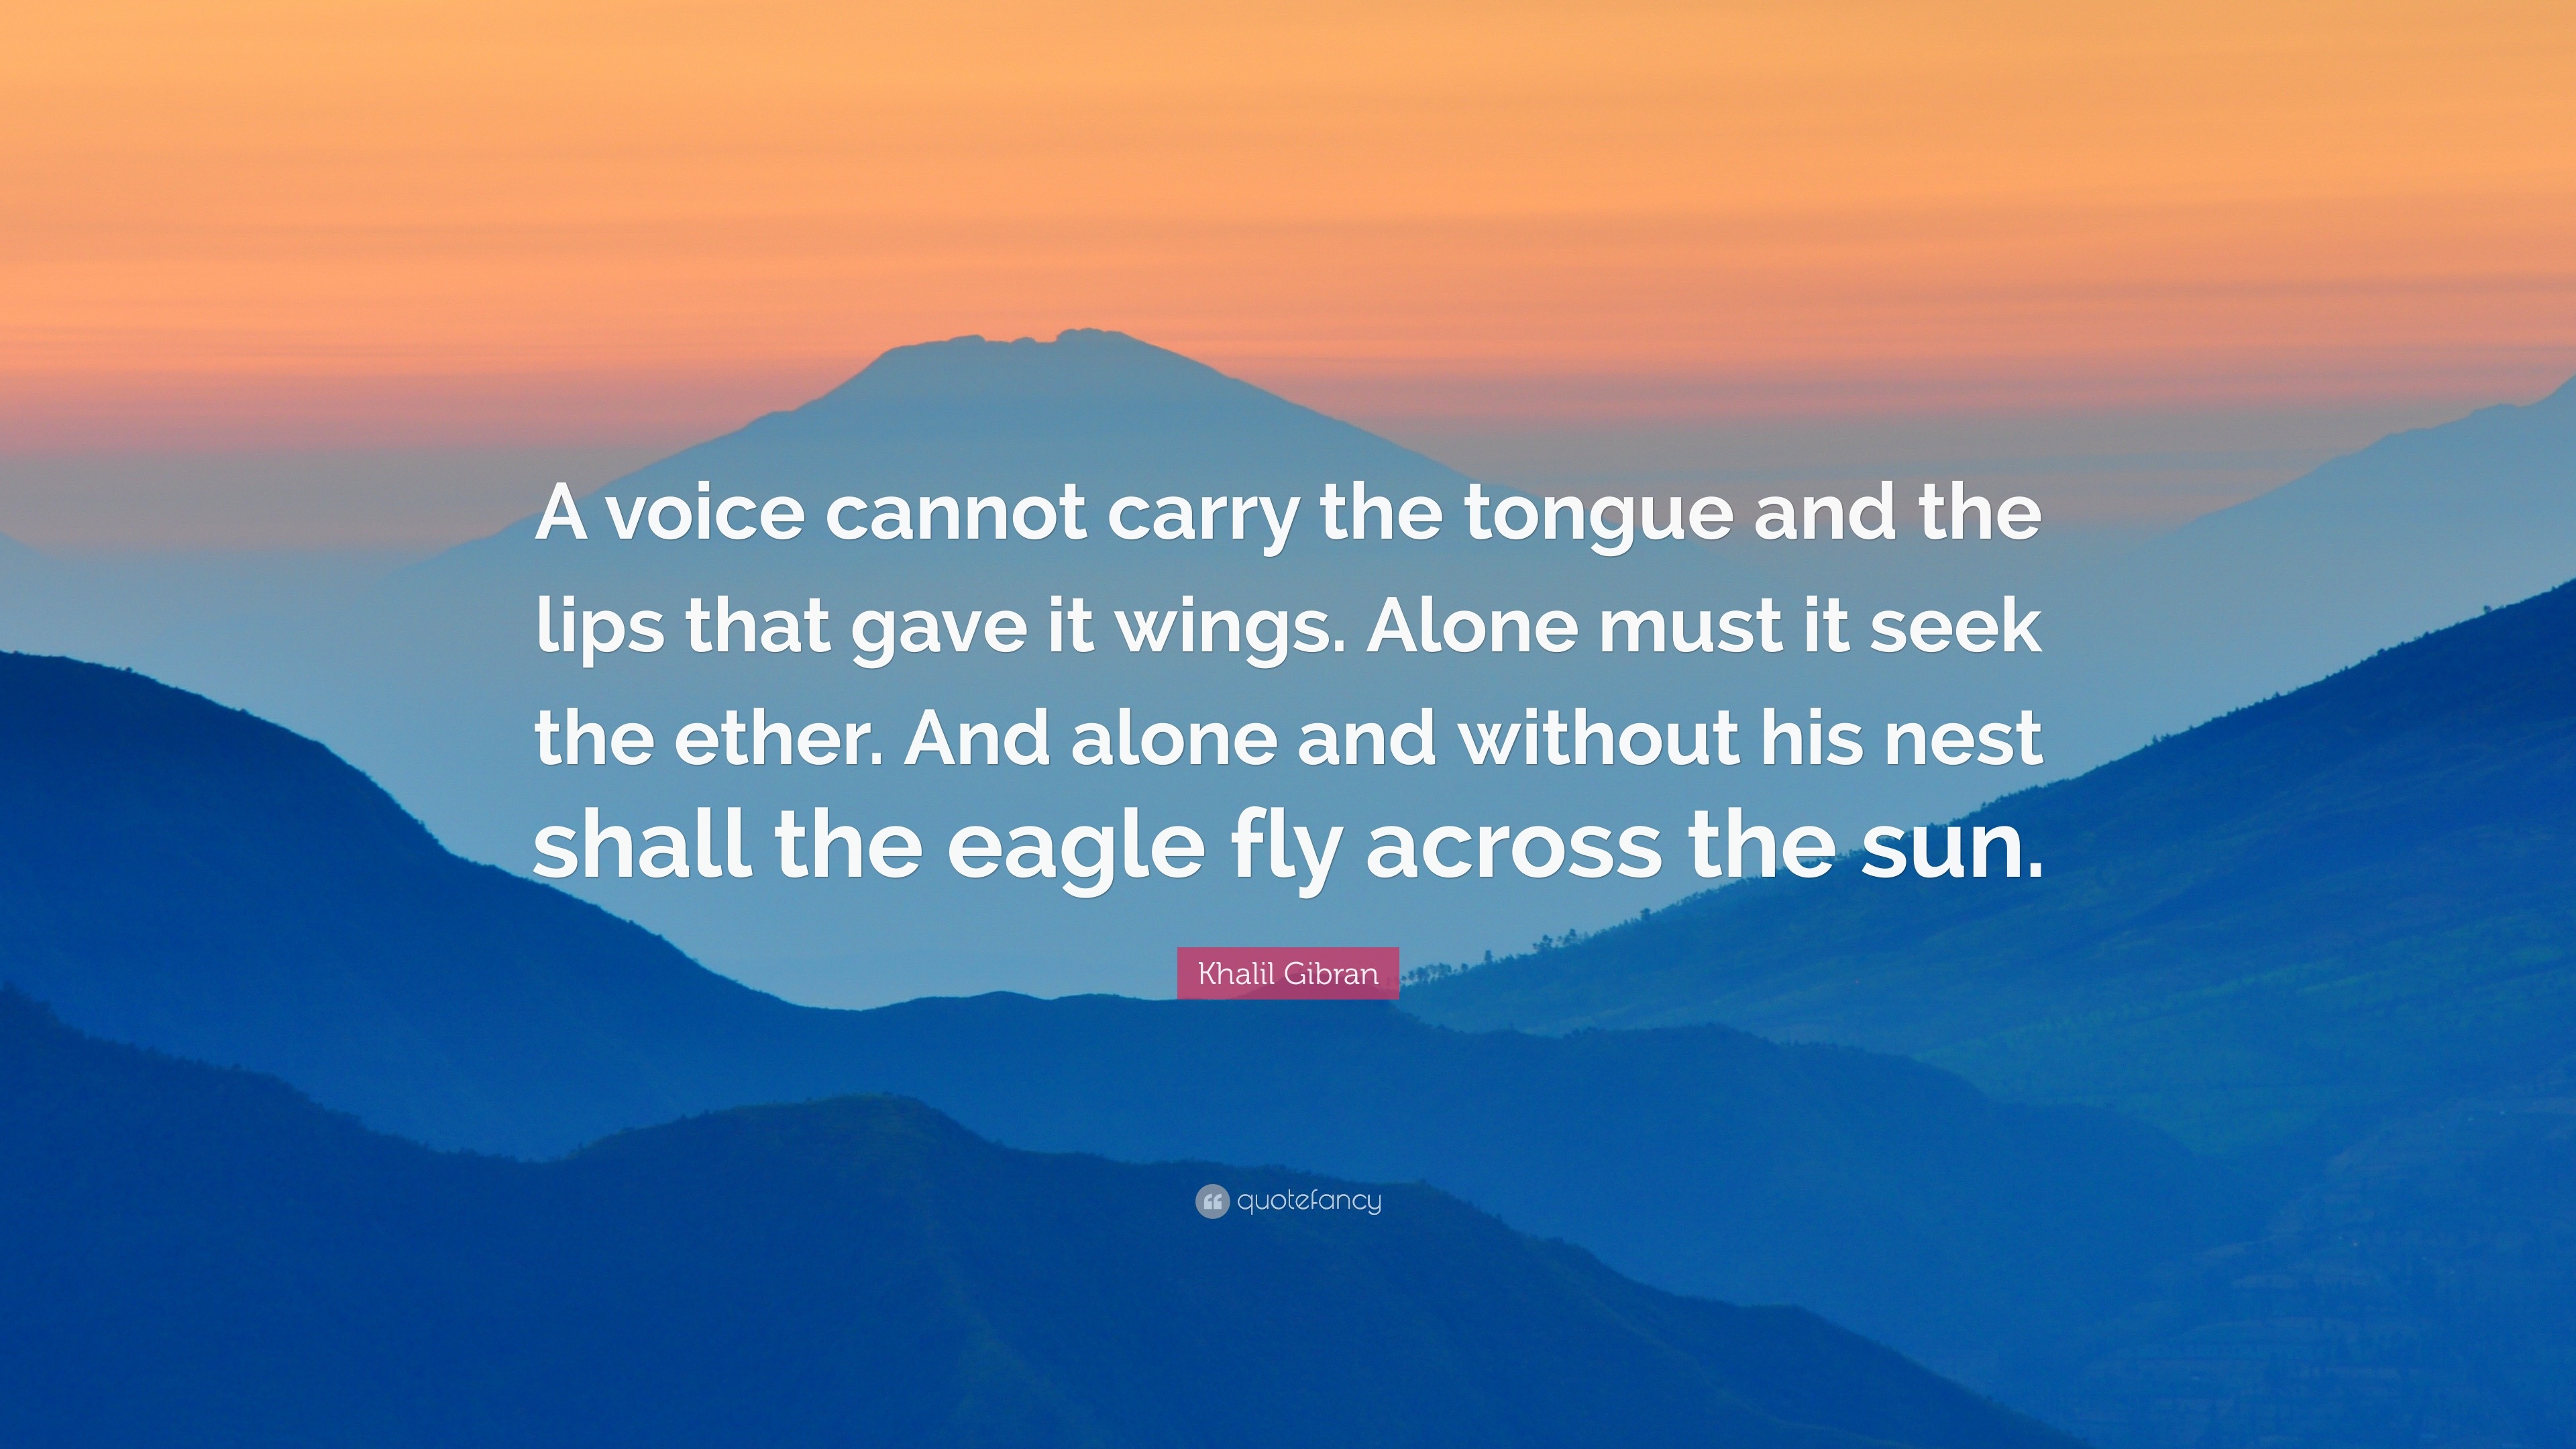 Khalil Gibran Quote: “A voice cannot carry the tongue and the lips that  gave it wings. Alone must it seek the ether. And alone and without his”